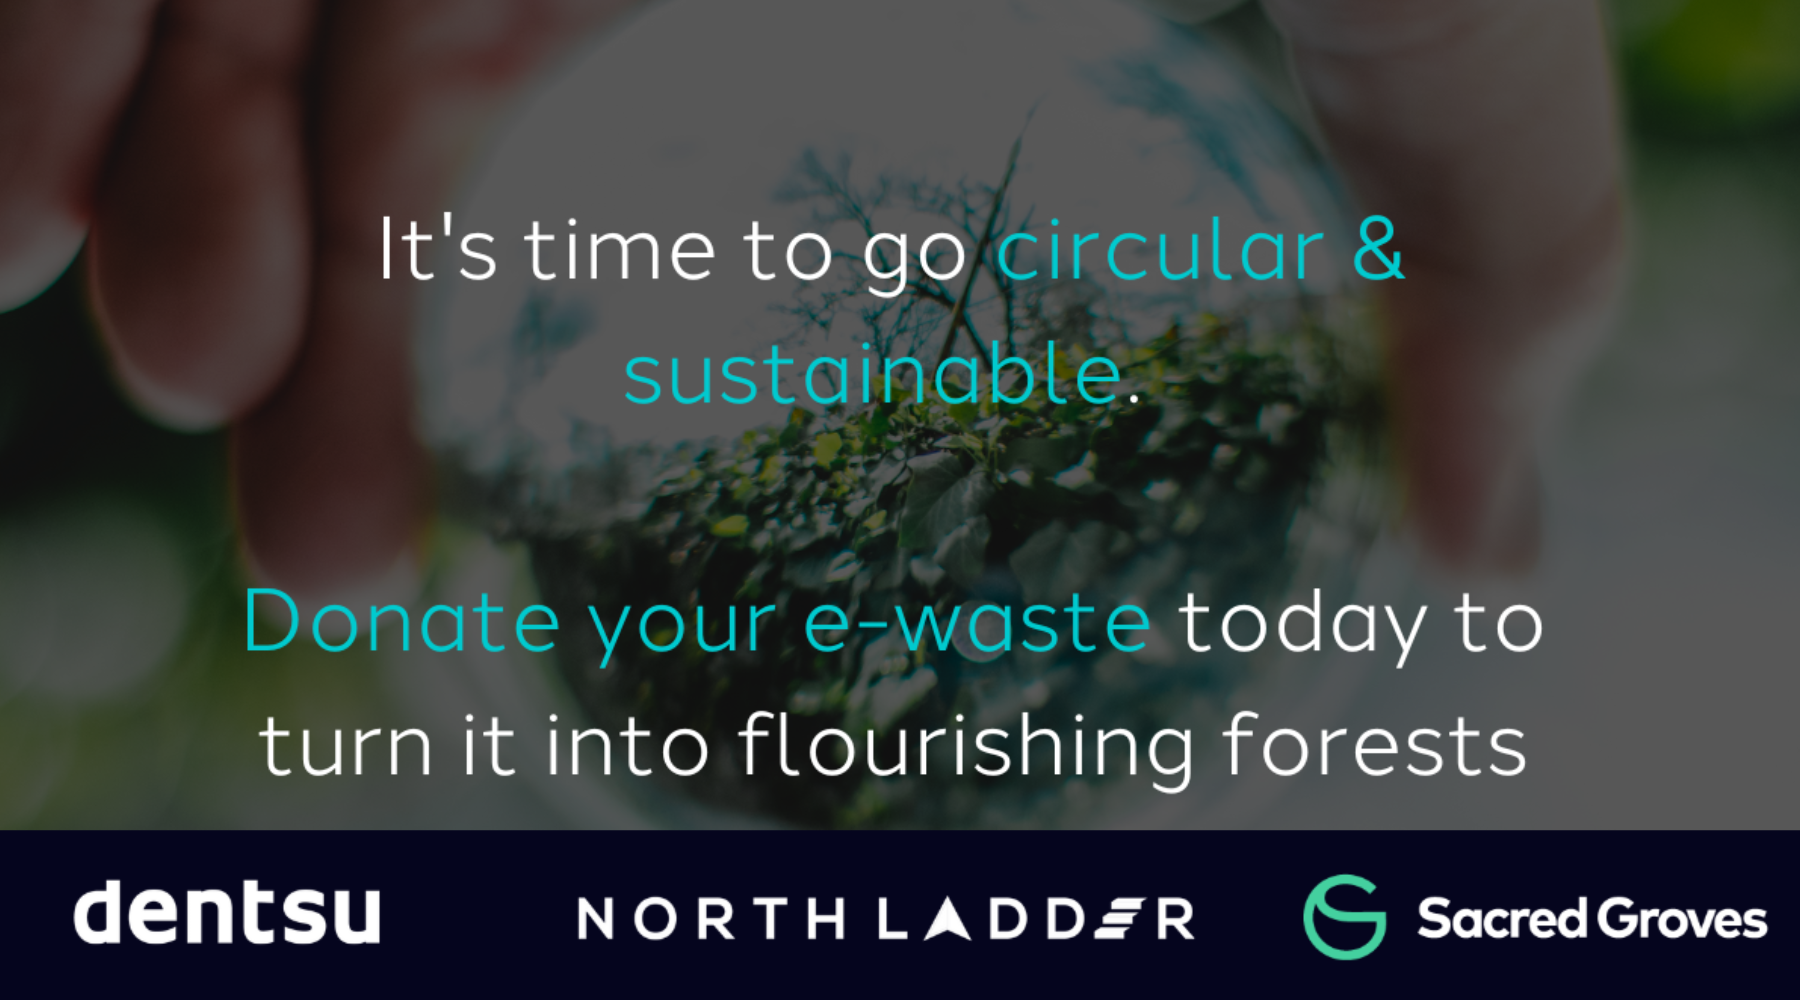 Dentsu MENA Partners with Sacred Groves to Turn E-waste into Flourishing Forests